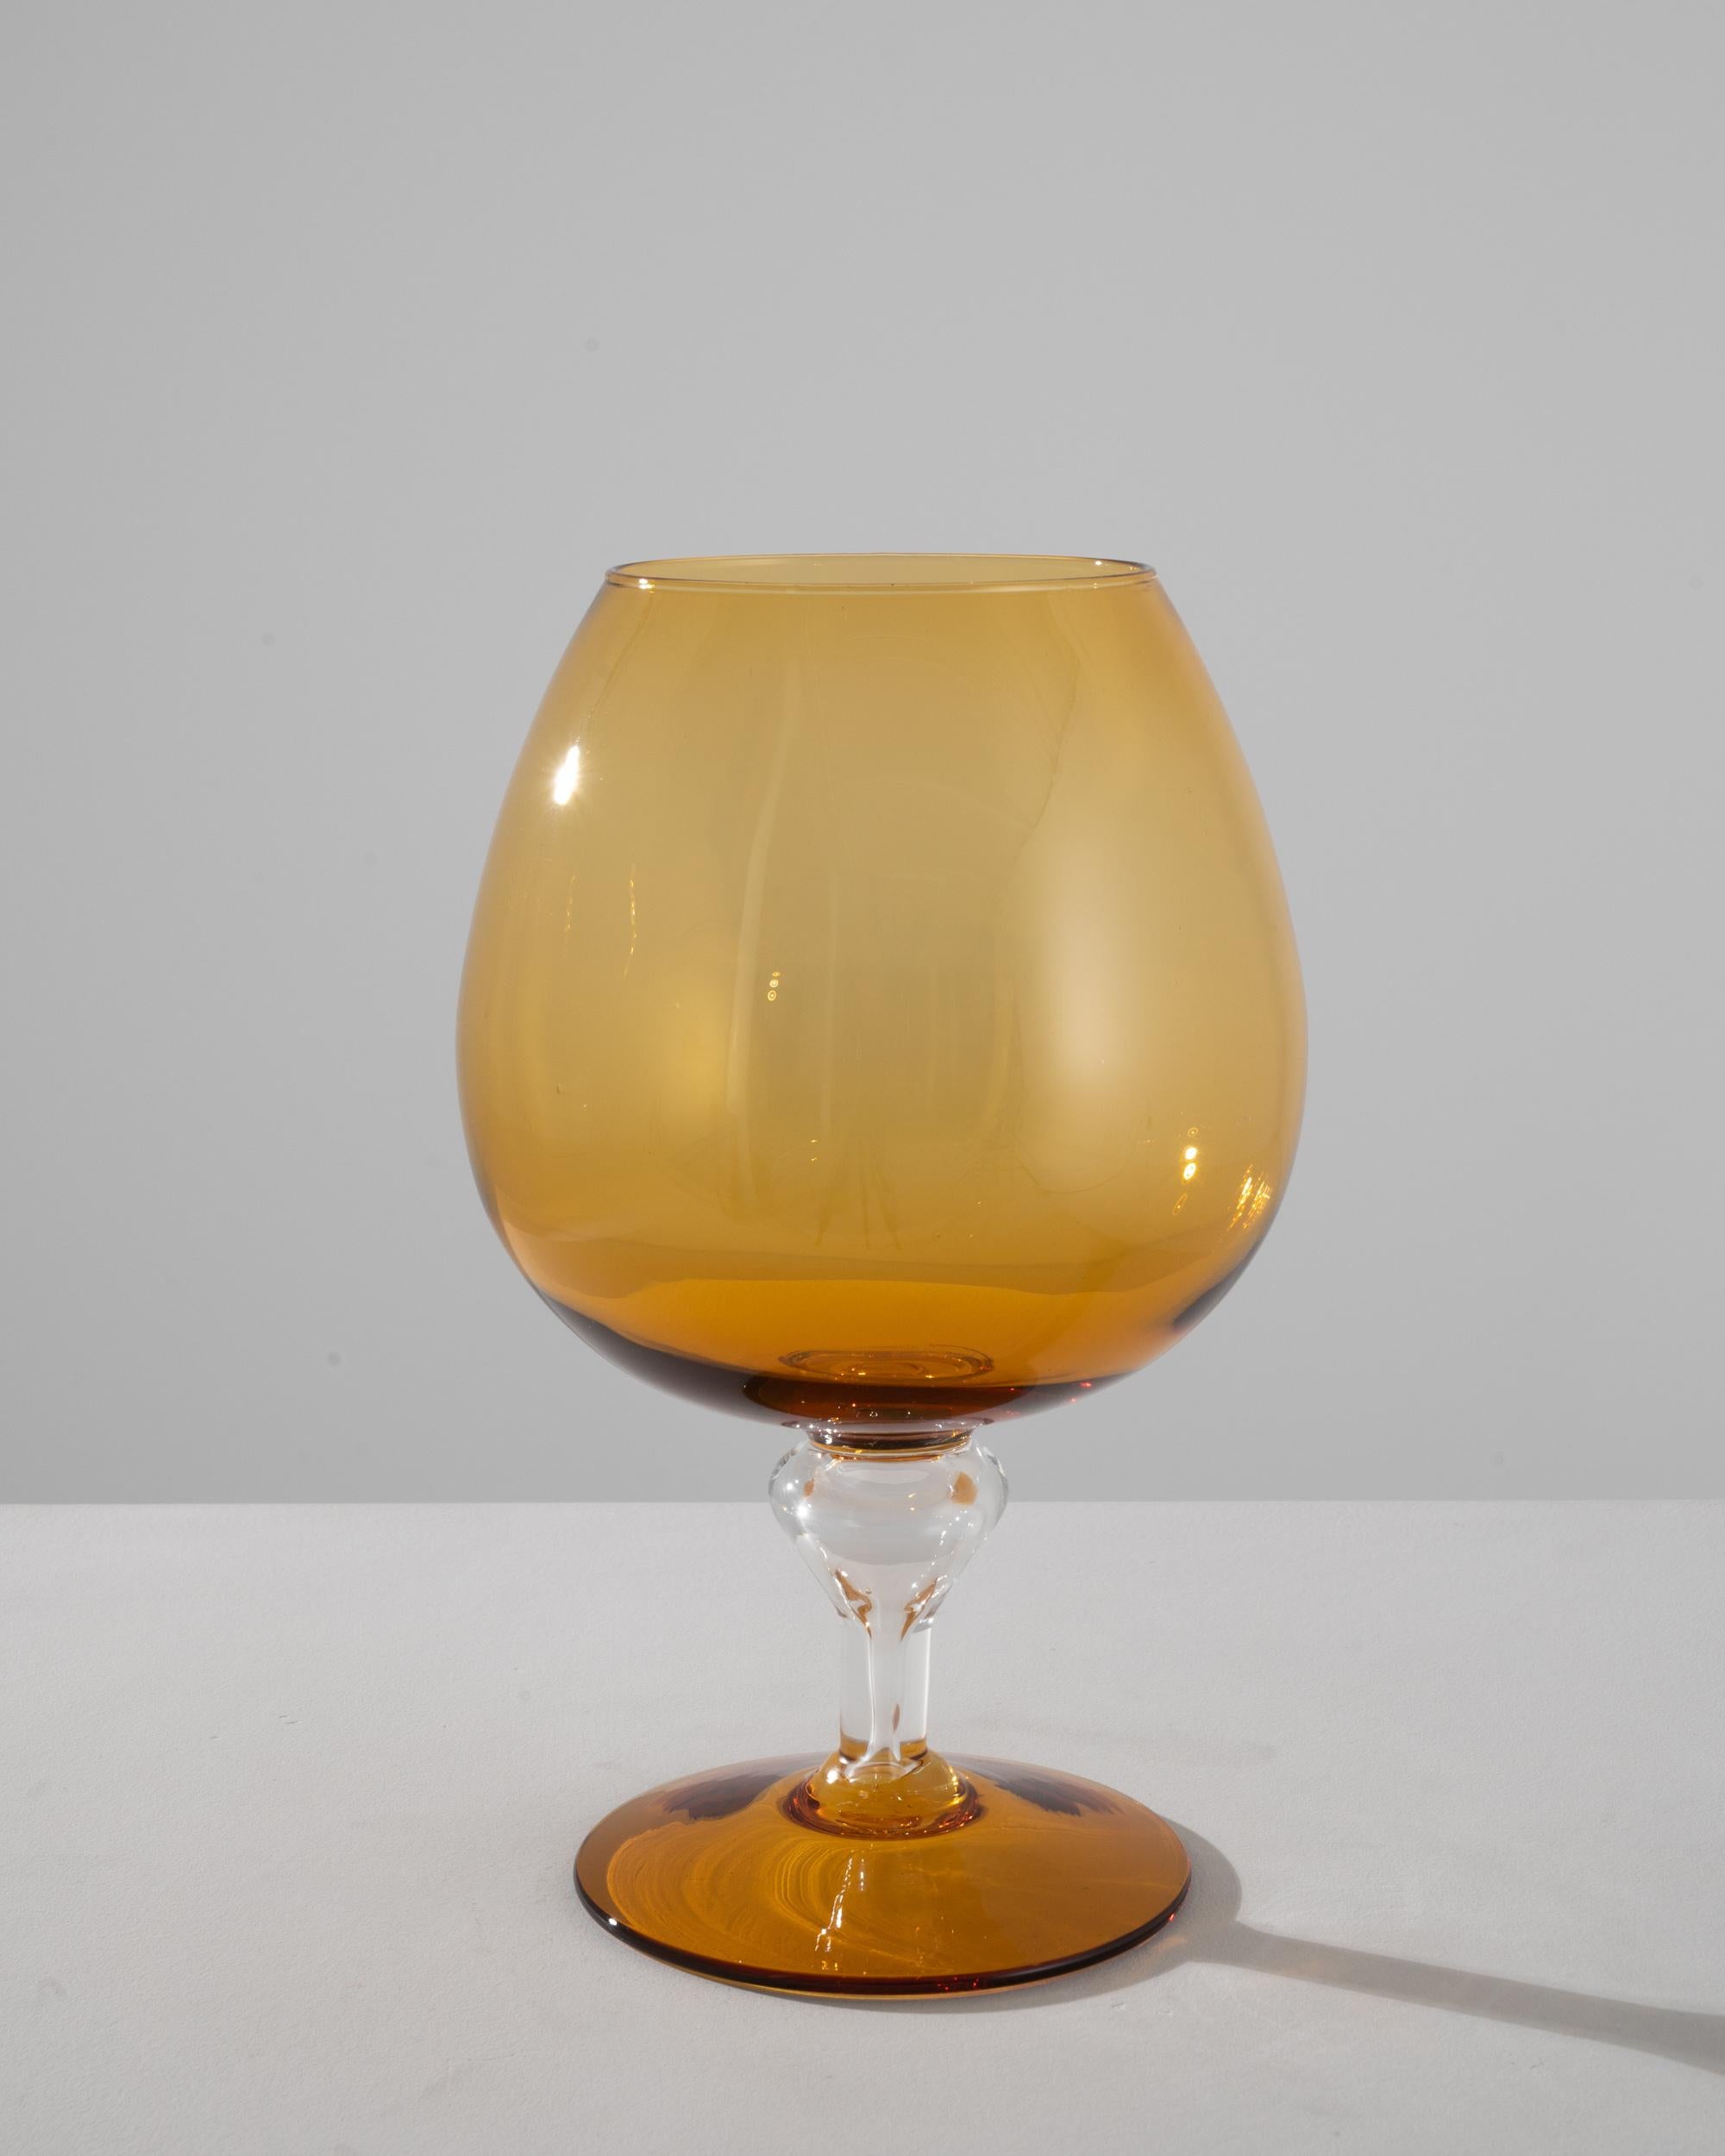 This 1960s Italian yellow glass goblet is a stunning example of vintage craftsmanship. The amber-colored glass, with its soft, sun-kissed glow, brings warmth to any room. The goblet's bowl is generous in size, elegantly rising from a beautifully